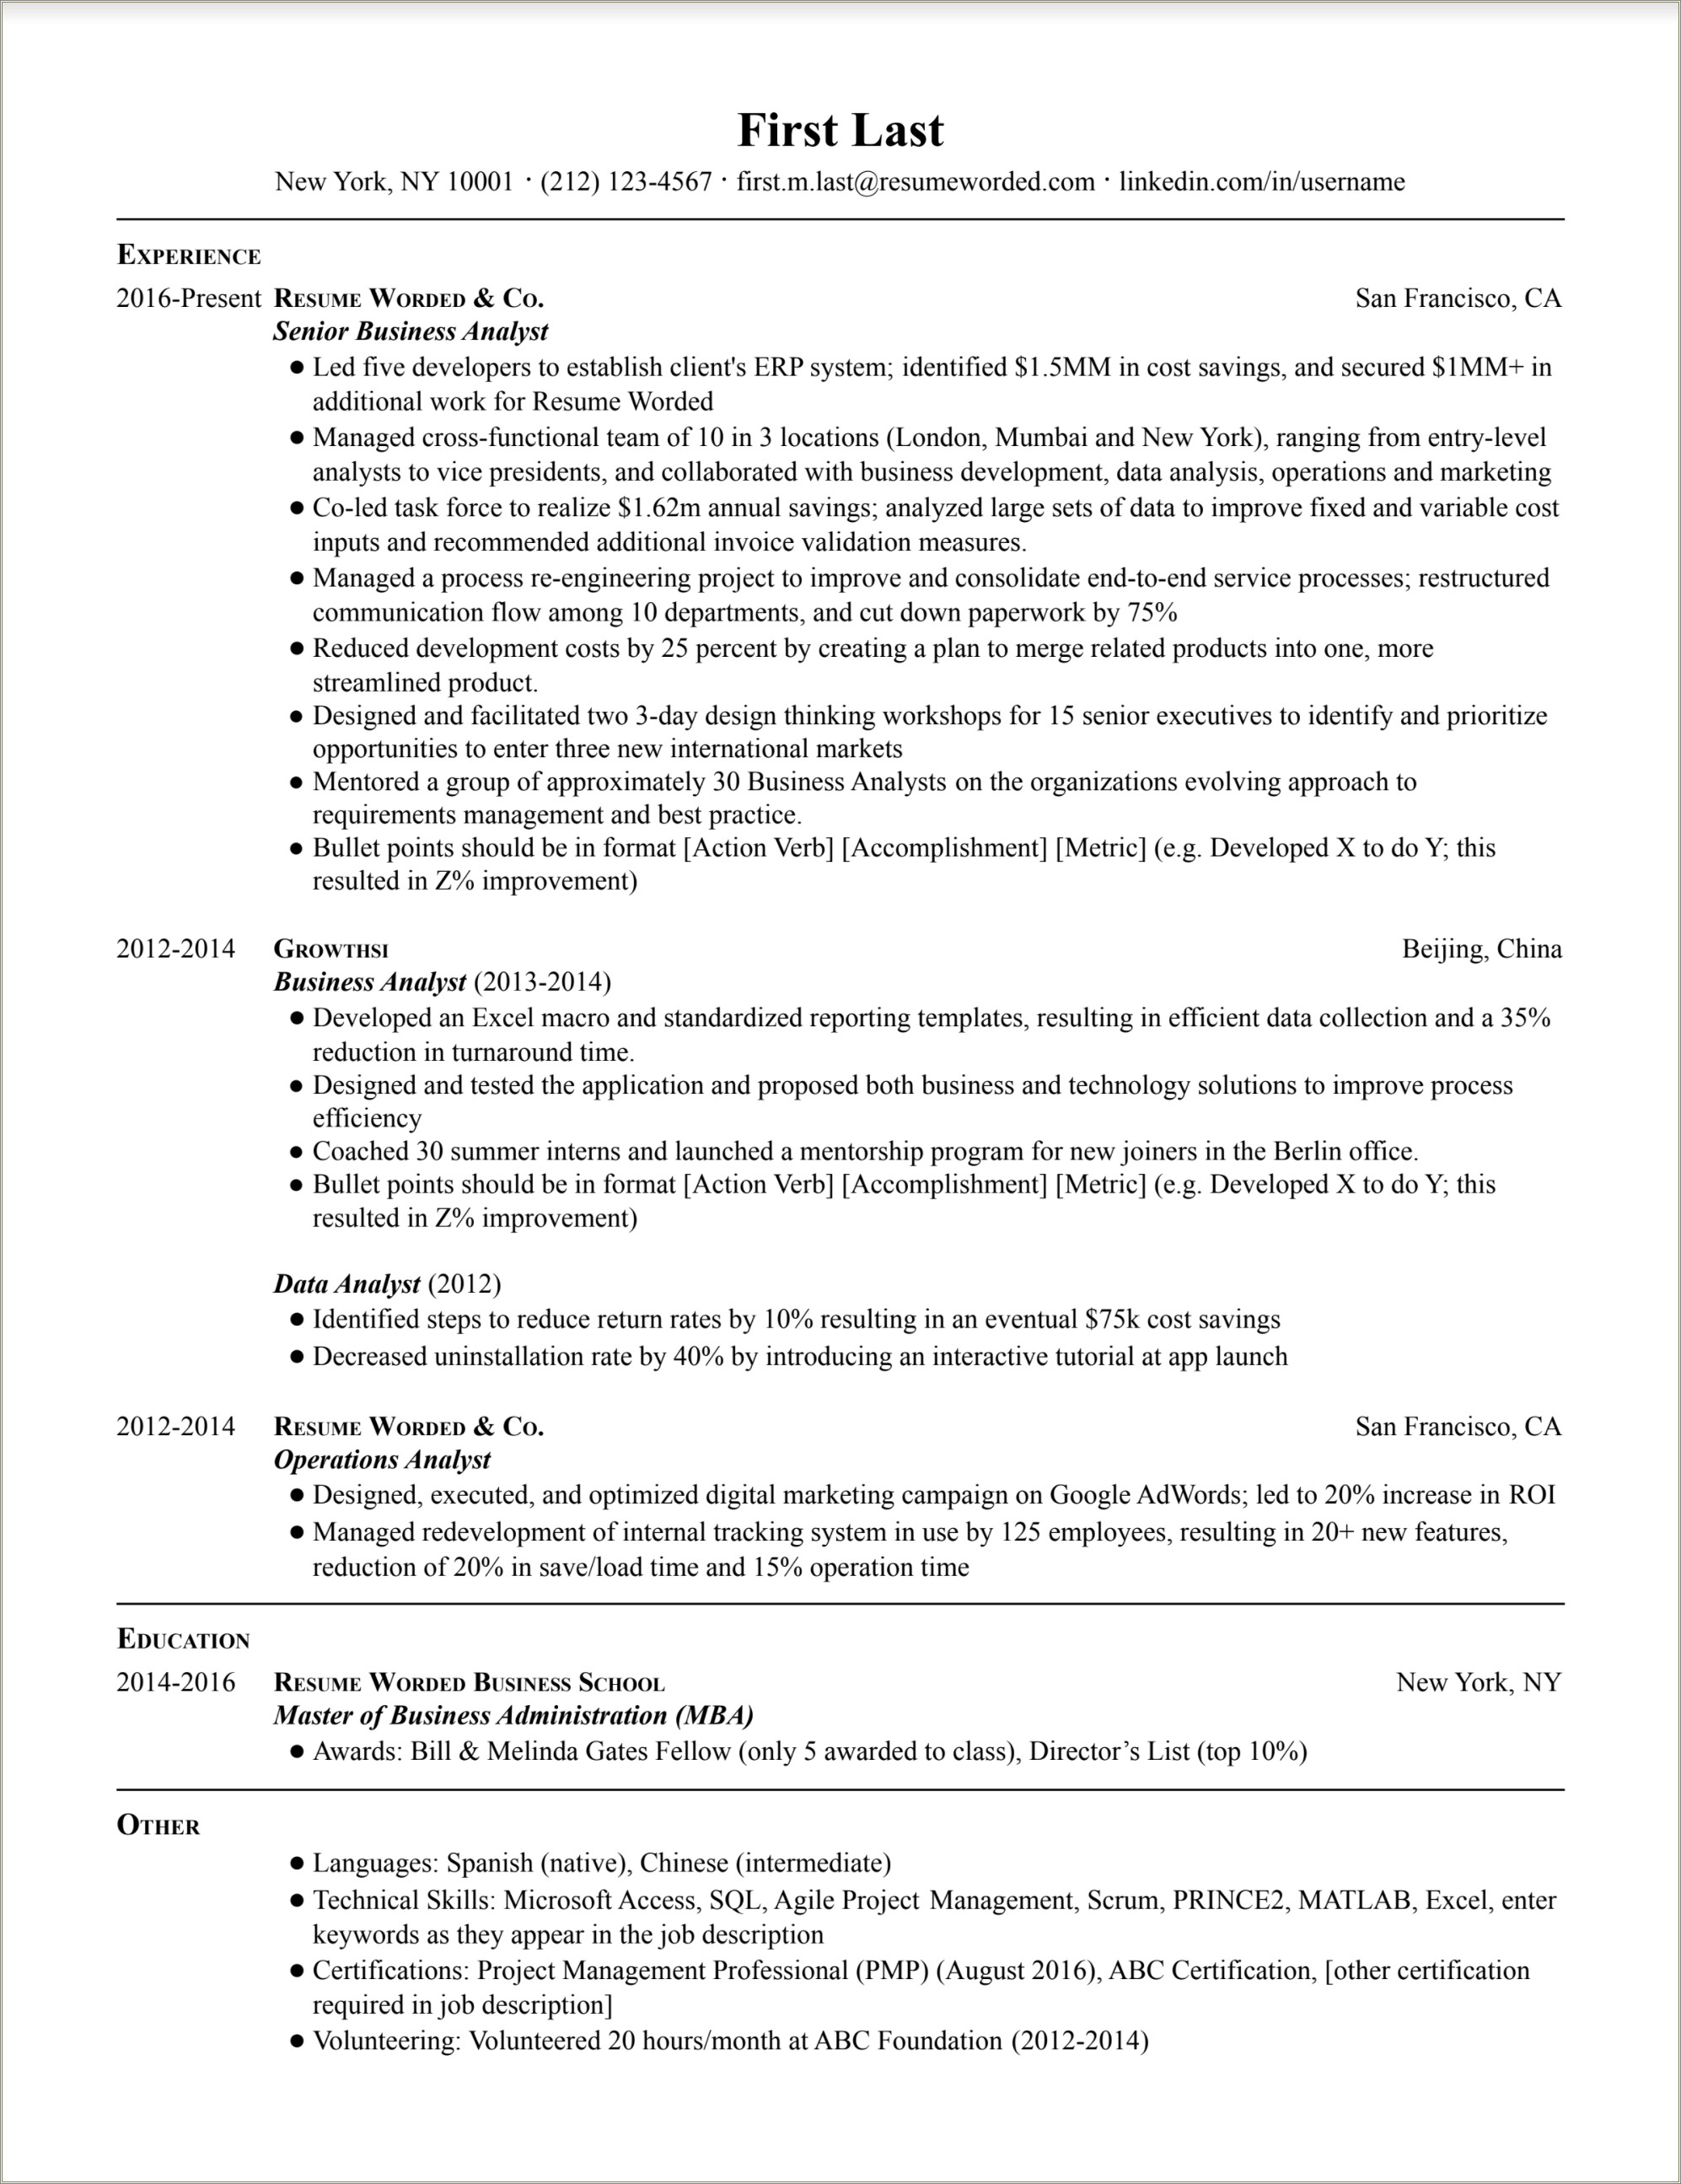 Busines System Analyst Resume Objective Samples